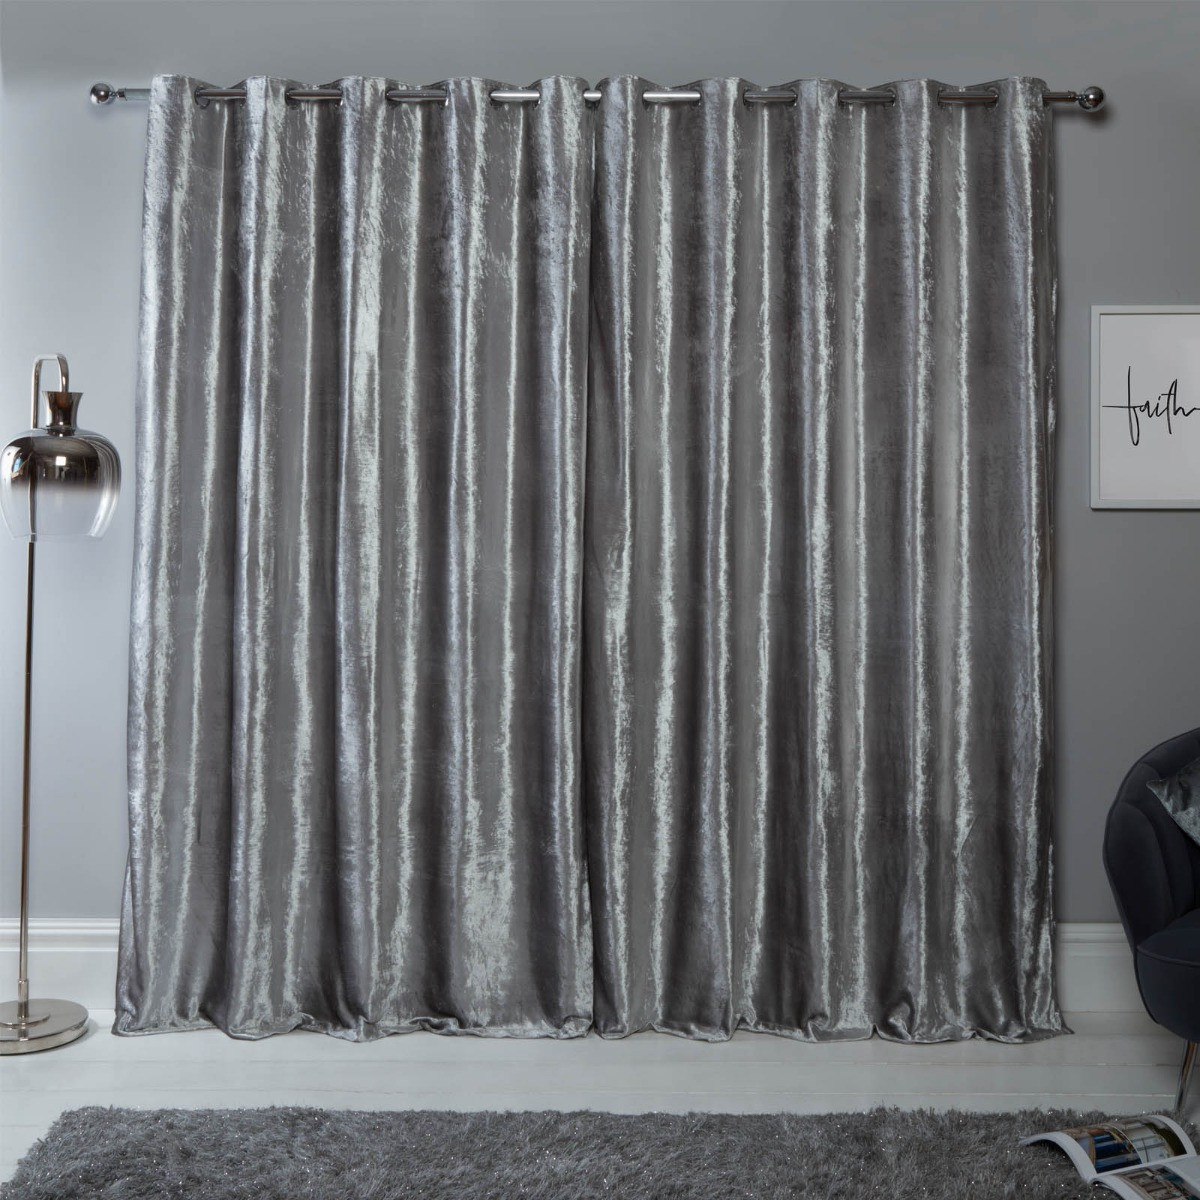 Sienna Home Crushed Velvet Eyelet Curtains - Silver 90" x 90">